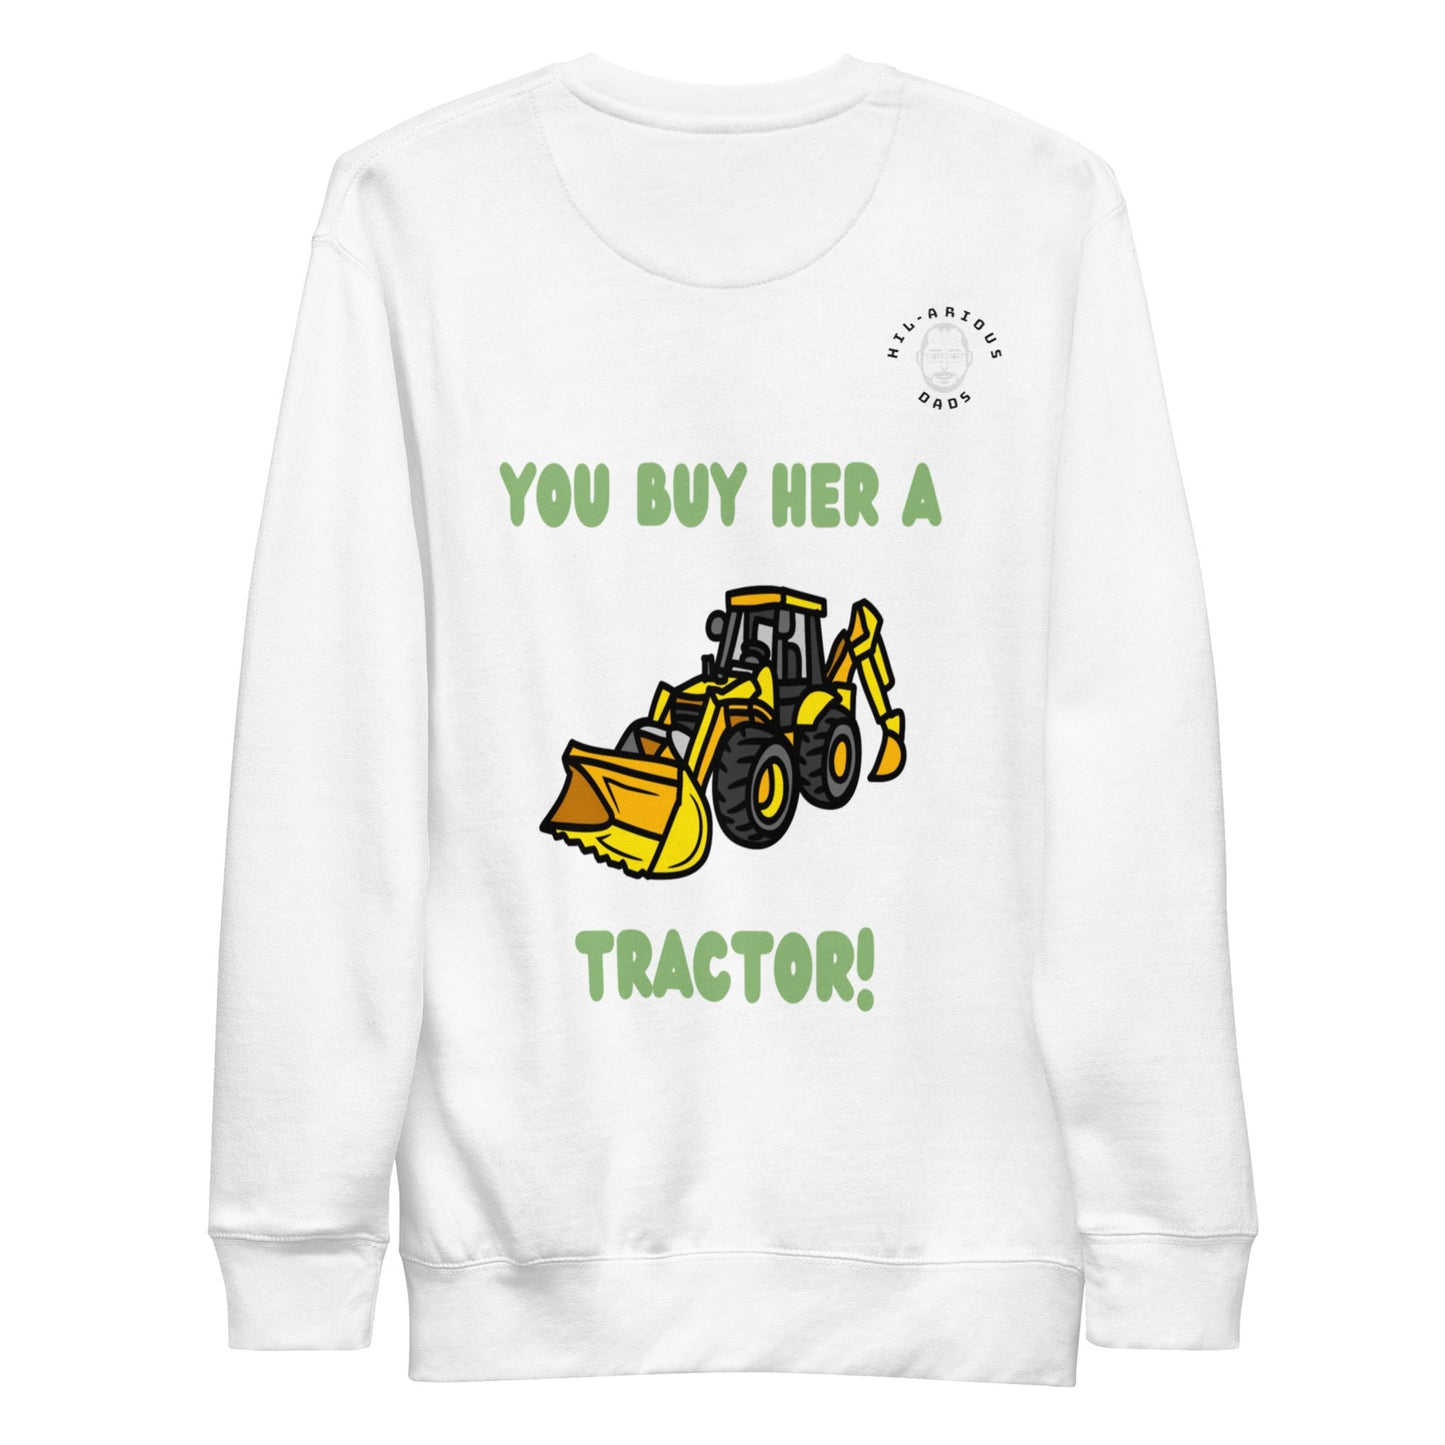 How do you get a country girl's attention?-Sweatshirt - Hil-arious Dads